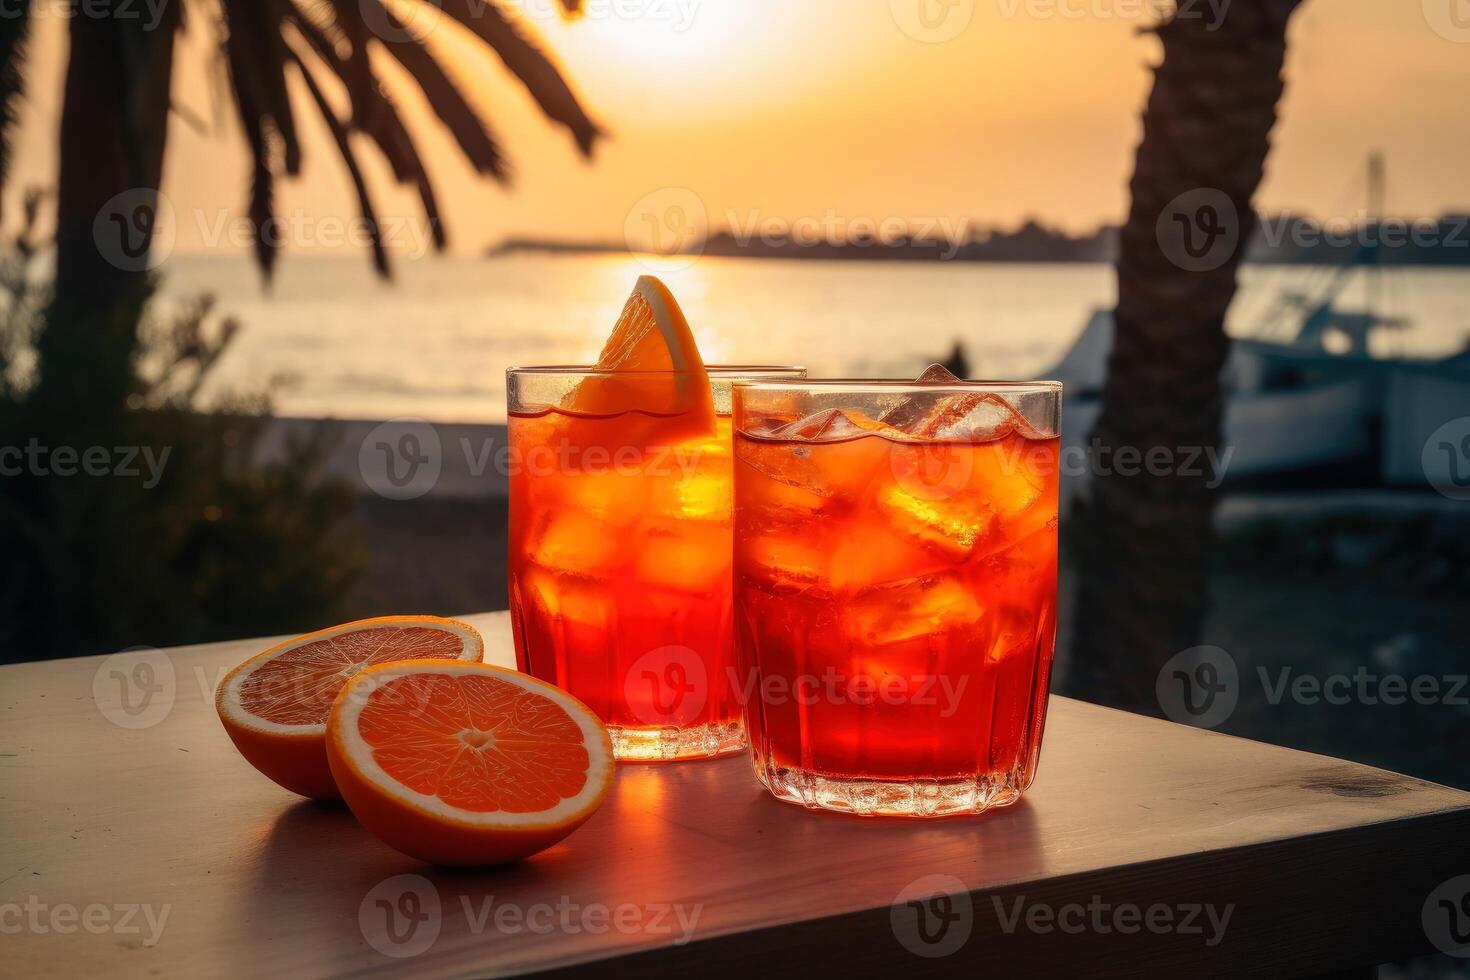 https://static.vecteezy.com/system/resources/previews/023/772/557/non_2x/a-fresh-orange-aperol-spritz-drink-in-a-sunset-close-to-the-ocean-created-with-generative-ai-technology-photo.jpg